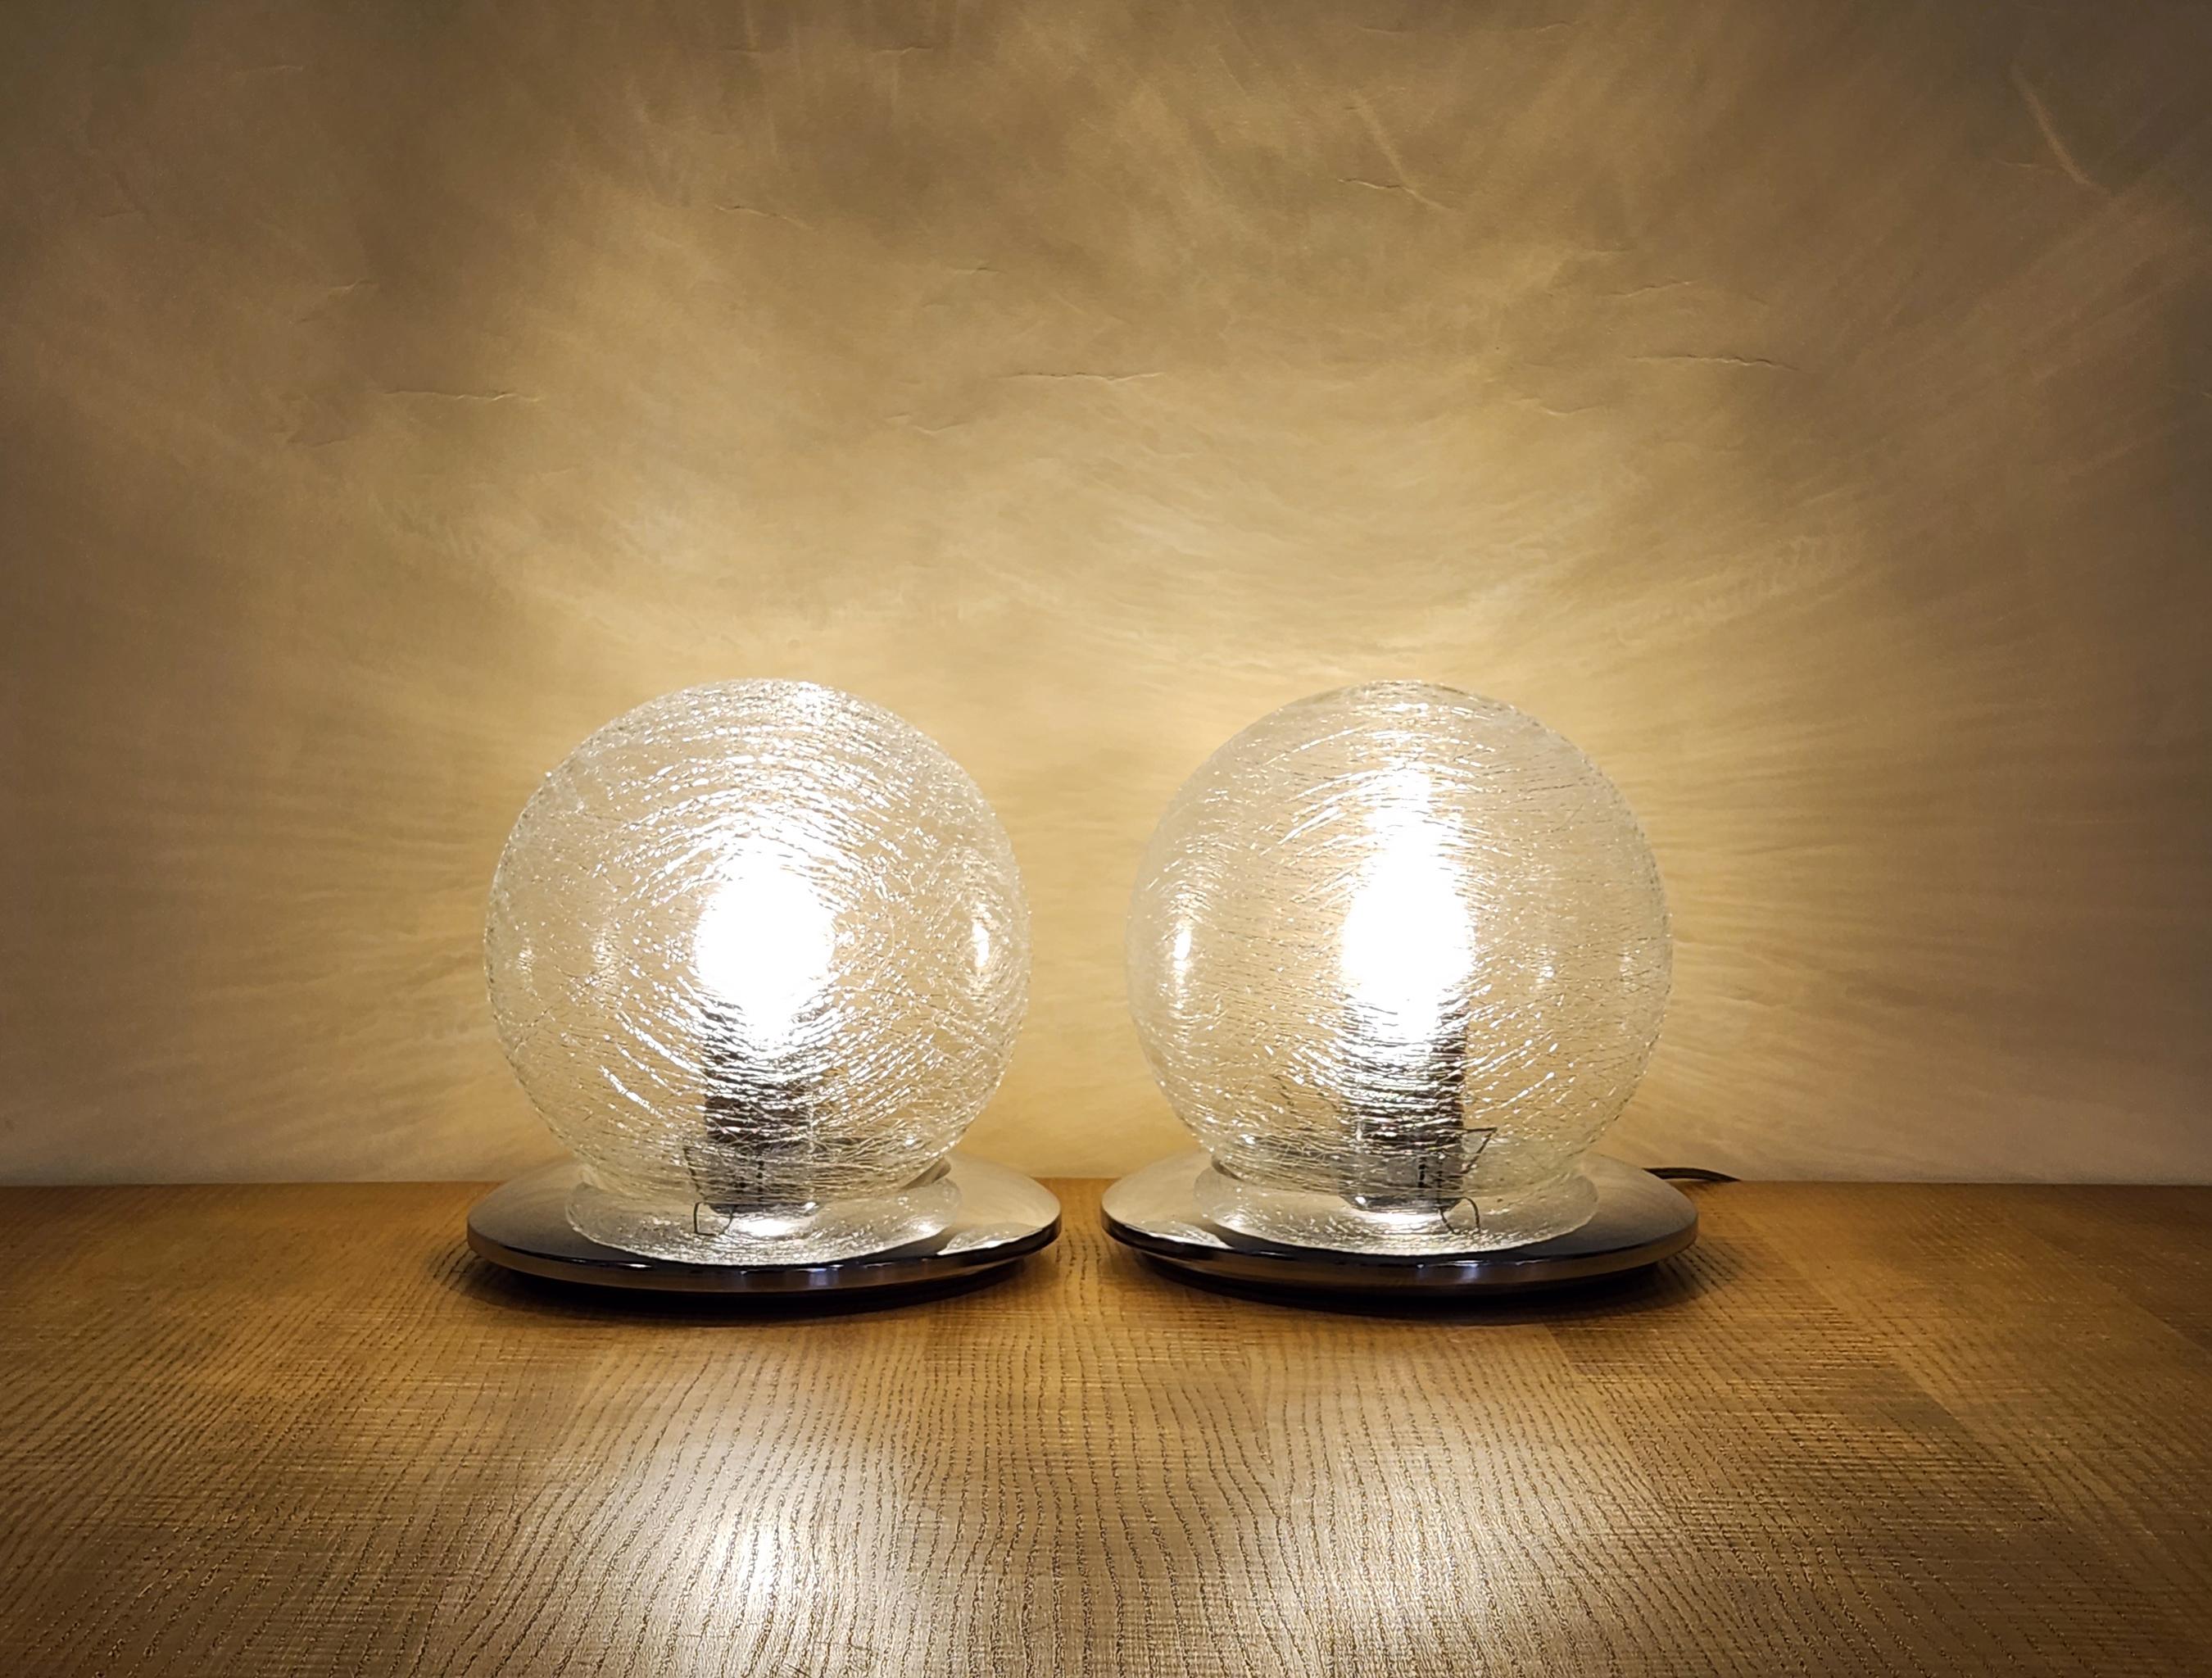 A pair of spherical murano glass table lamps, originating from Italy circa 1970. Each lamp consists of a glass orb sat on top of a metal base. The glass has been handblown, and features a fibrous textured effect. Stylish, mysterious, and an